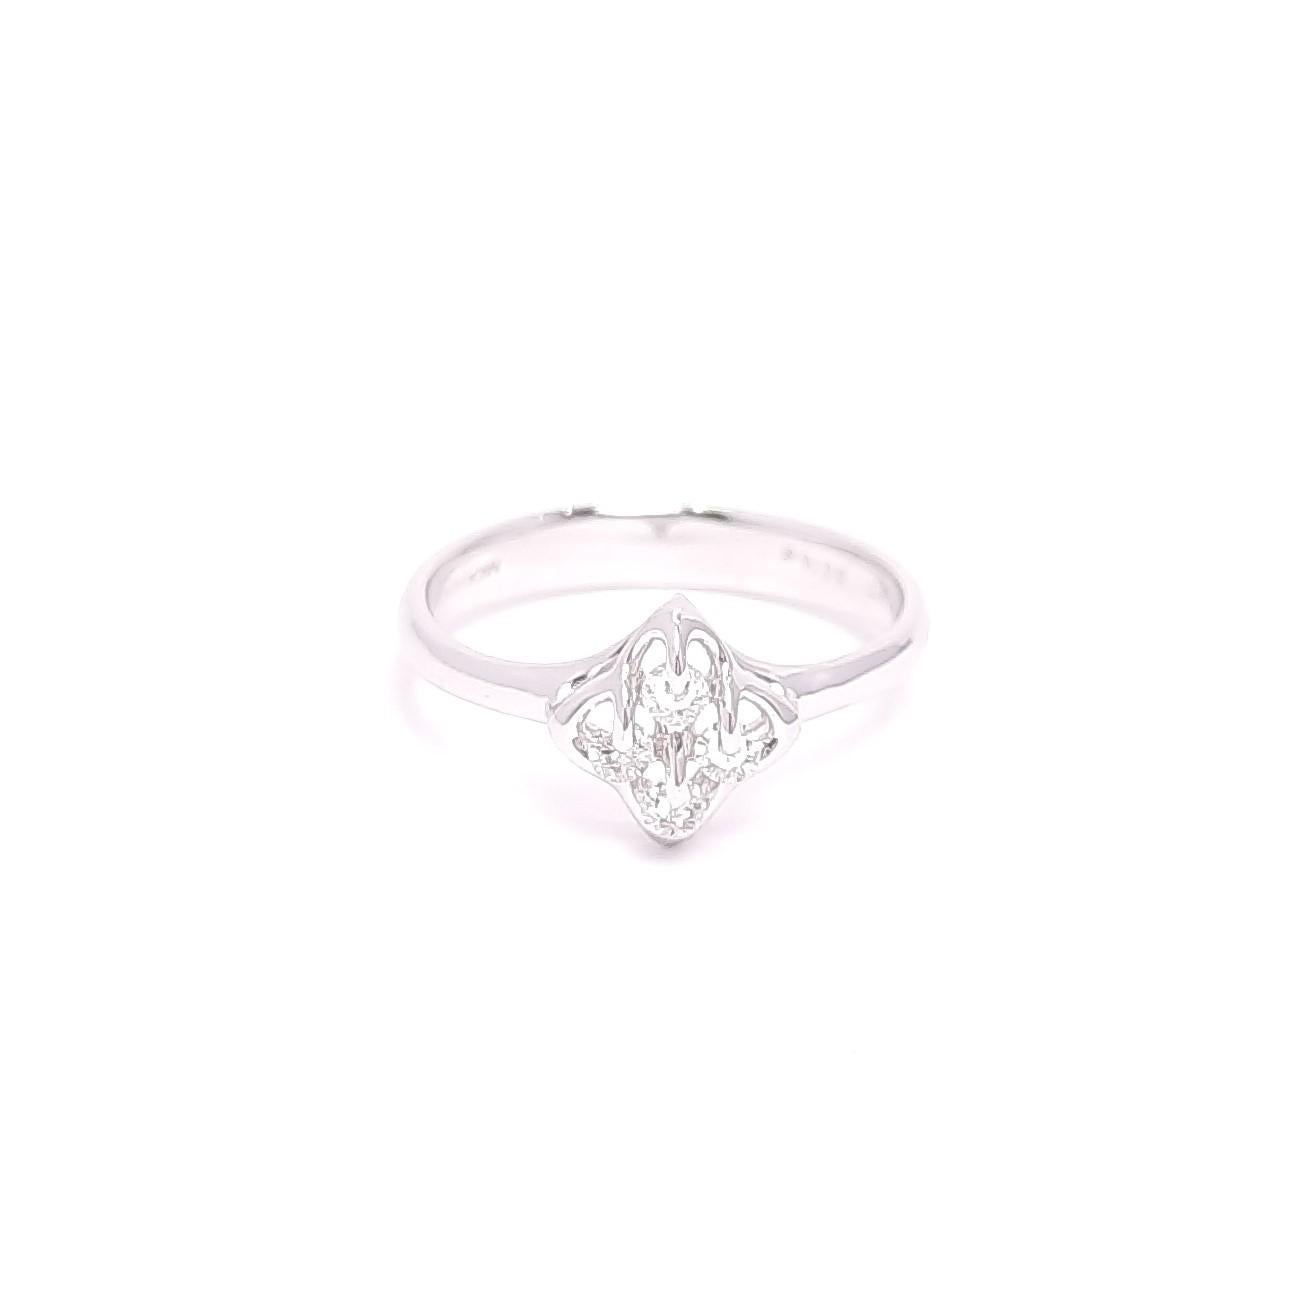 Inspired by the famous Russian Ballet, the Prima Star diamond Ring created by MOISEIKIN® charm your day with the exceptional hue and uniqueness. The design is created with patented Russian setting technology, in which a gemstone trembles and rotates